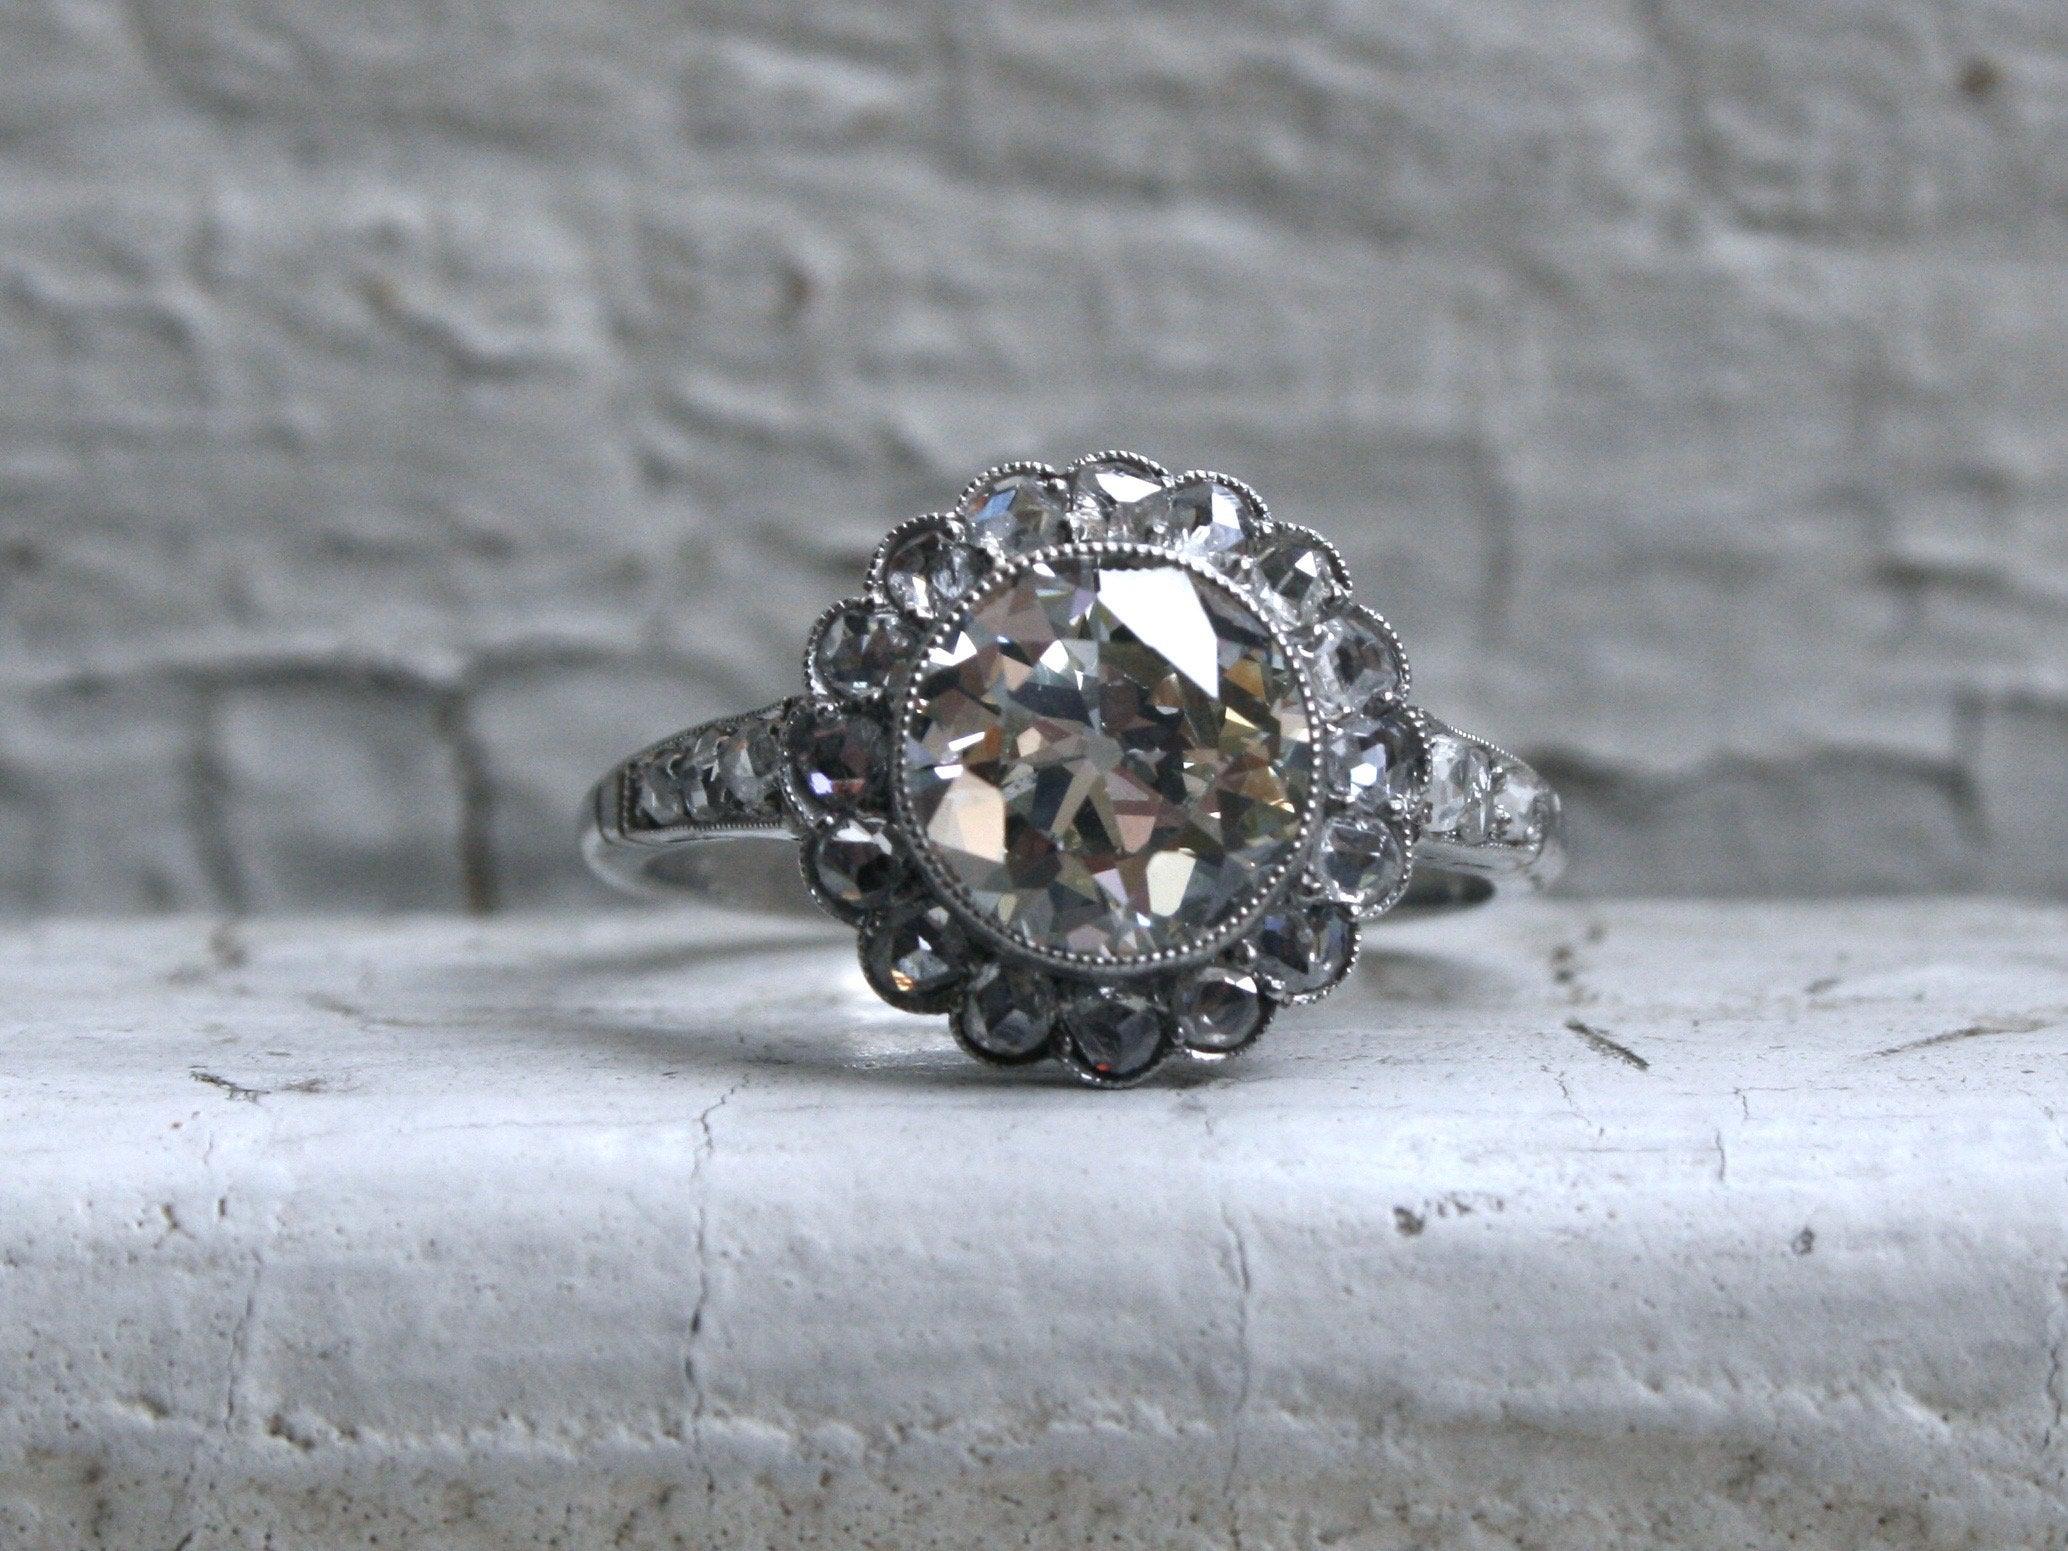 So gorgeous! I can't even explain how much I LOVE this Vintage Halo Diamond Engagement Ring. It has super sparkle, and is like, totally perfect! Crafted in Platinum, the design features a wonderful large Old Mine Cut Diamond Center Stone, surrounded